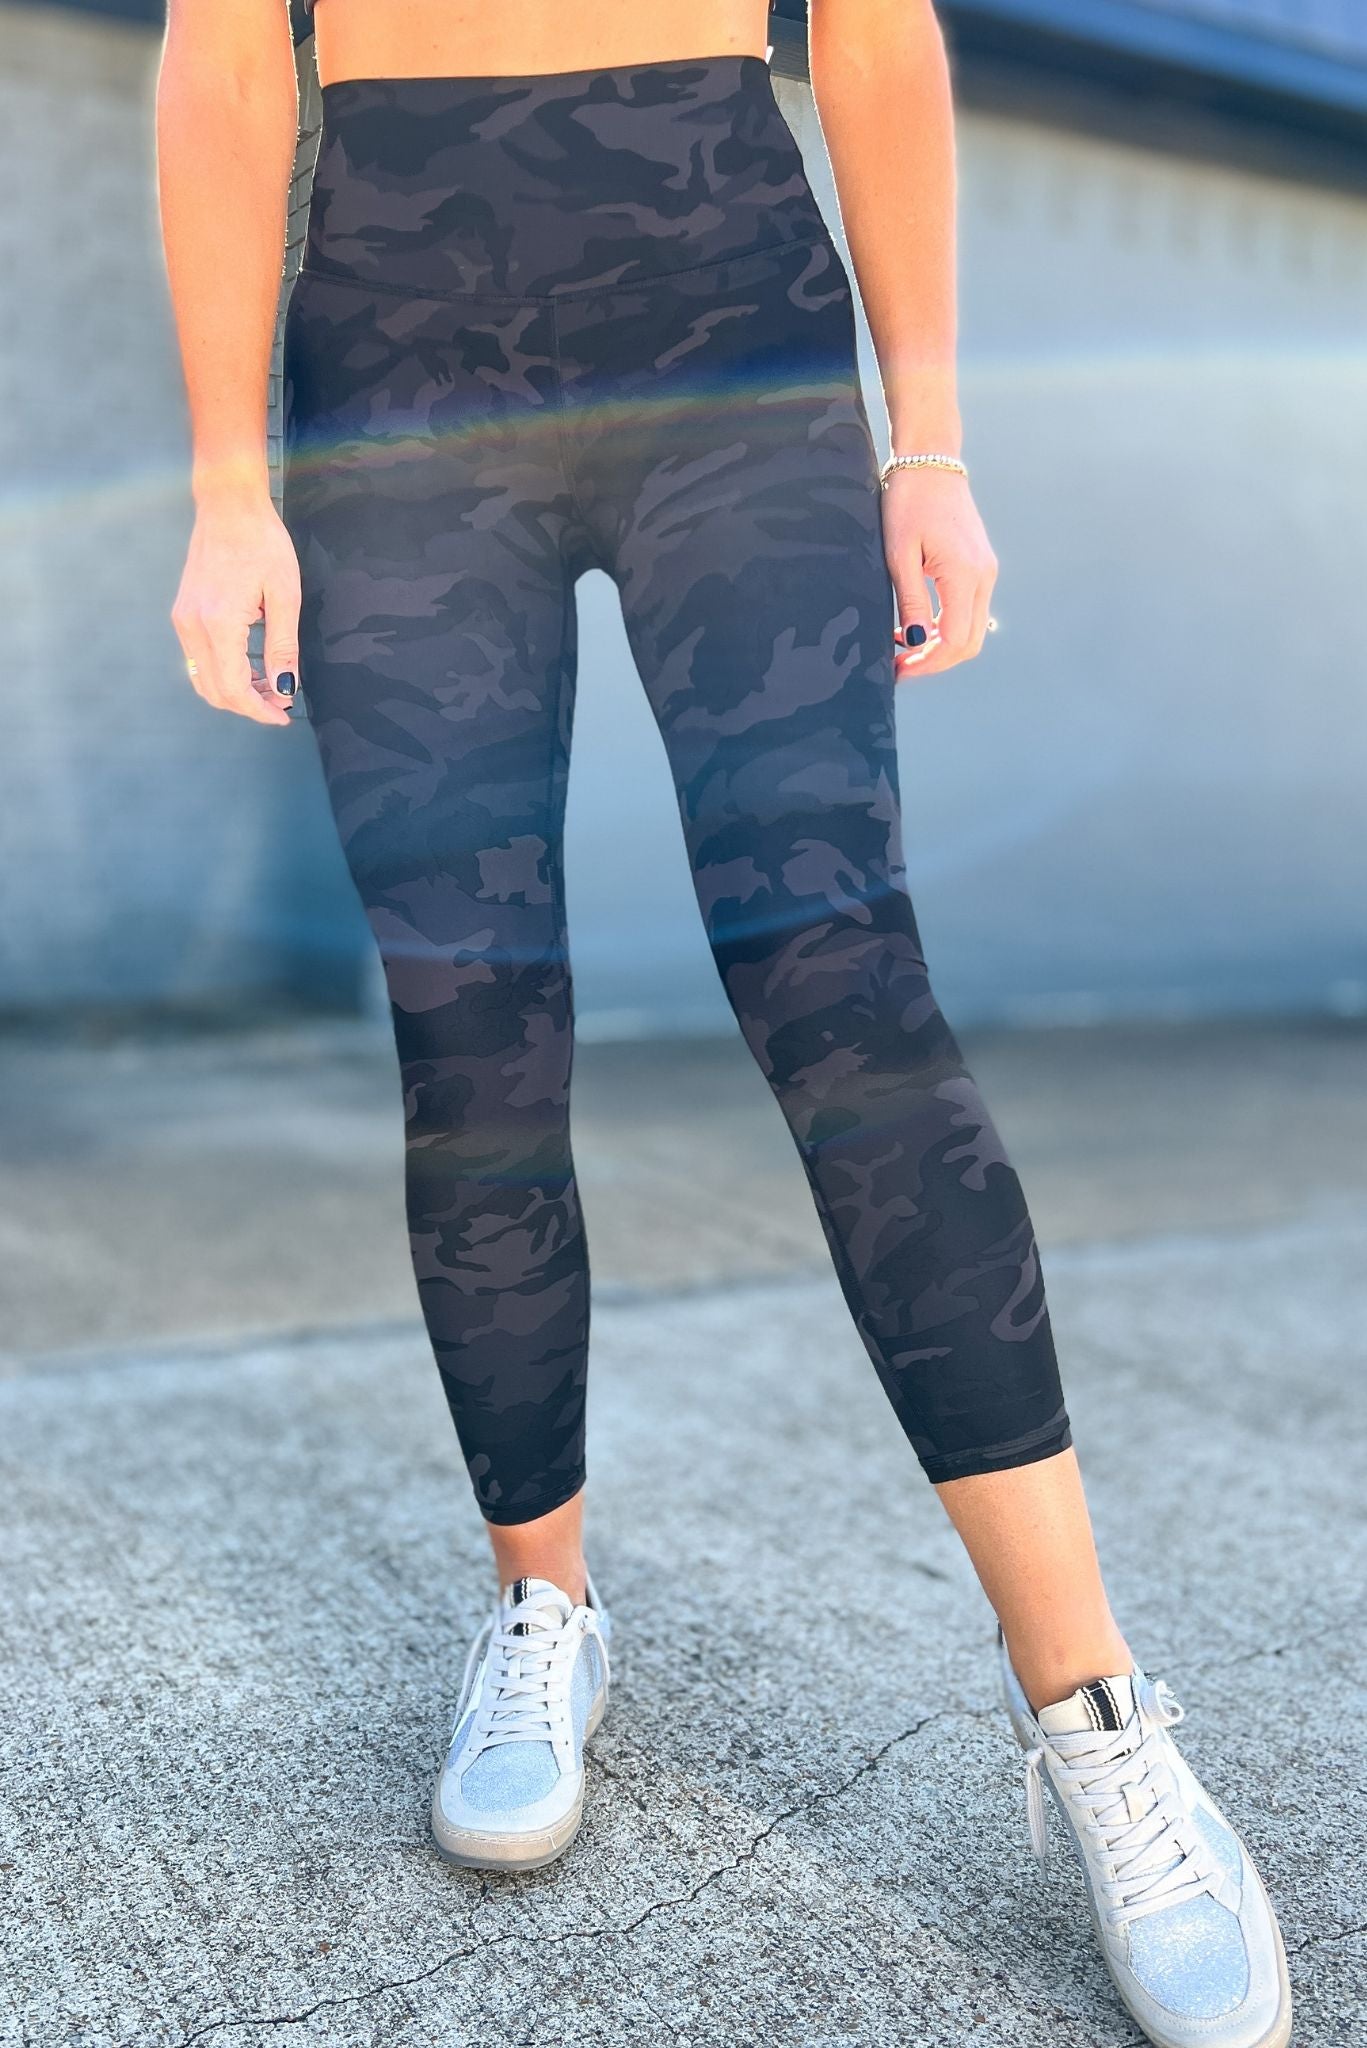 Load image into Gallery viewer, Black Camo Highwaist Seamless LeggingsSSYS The Label, athleisure, everyday wear, mom style, layered look, must have, shop style your senses by mallory fitzsimmons
